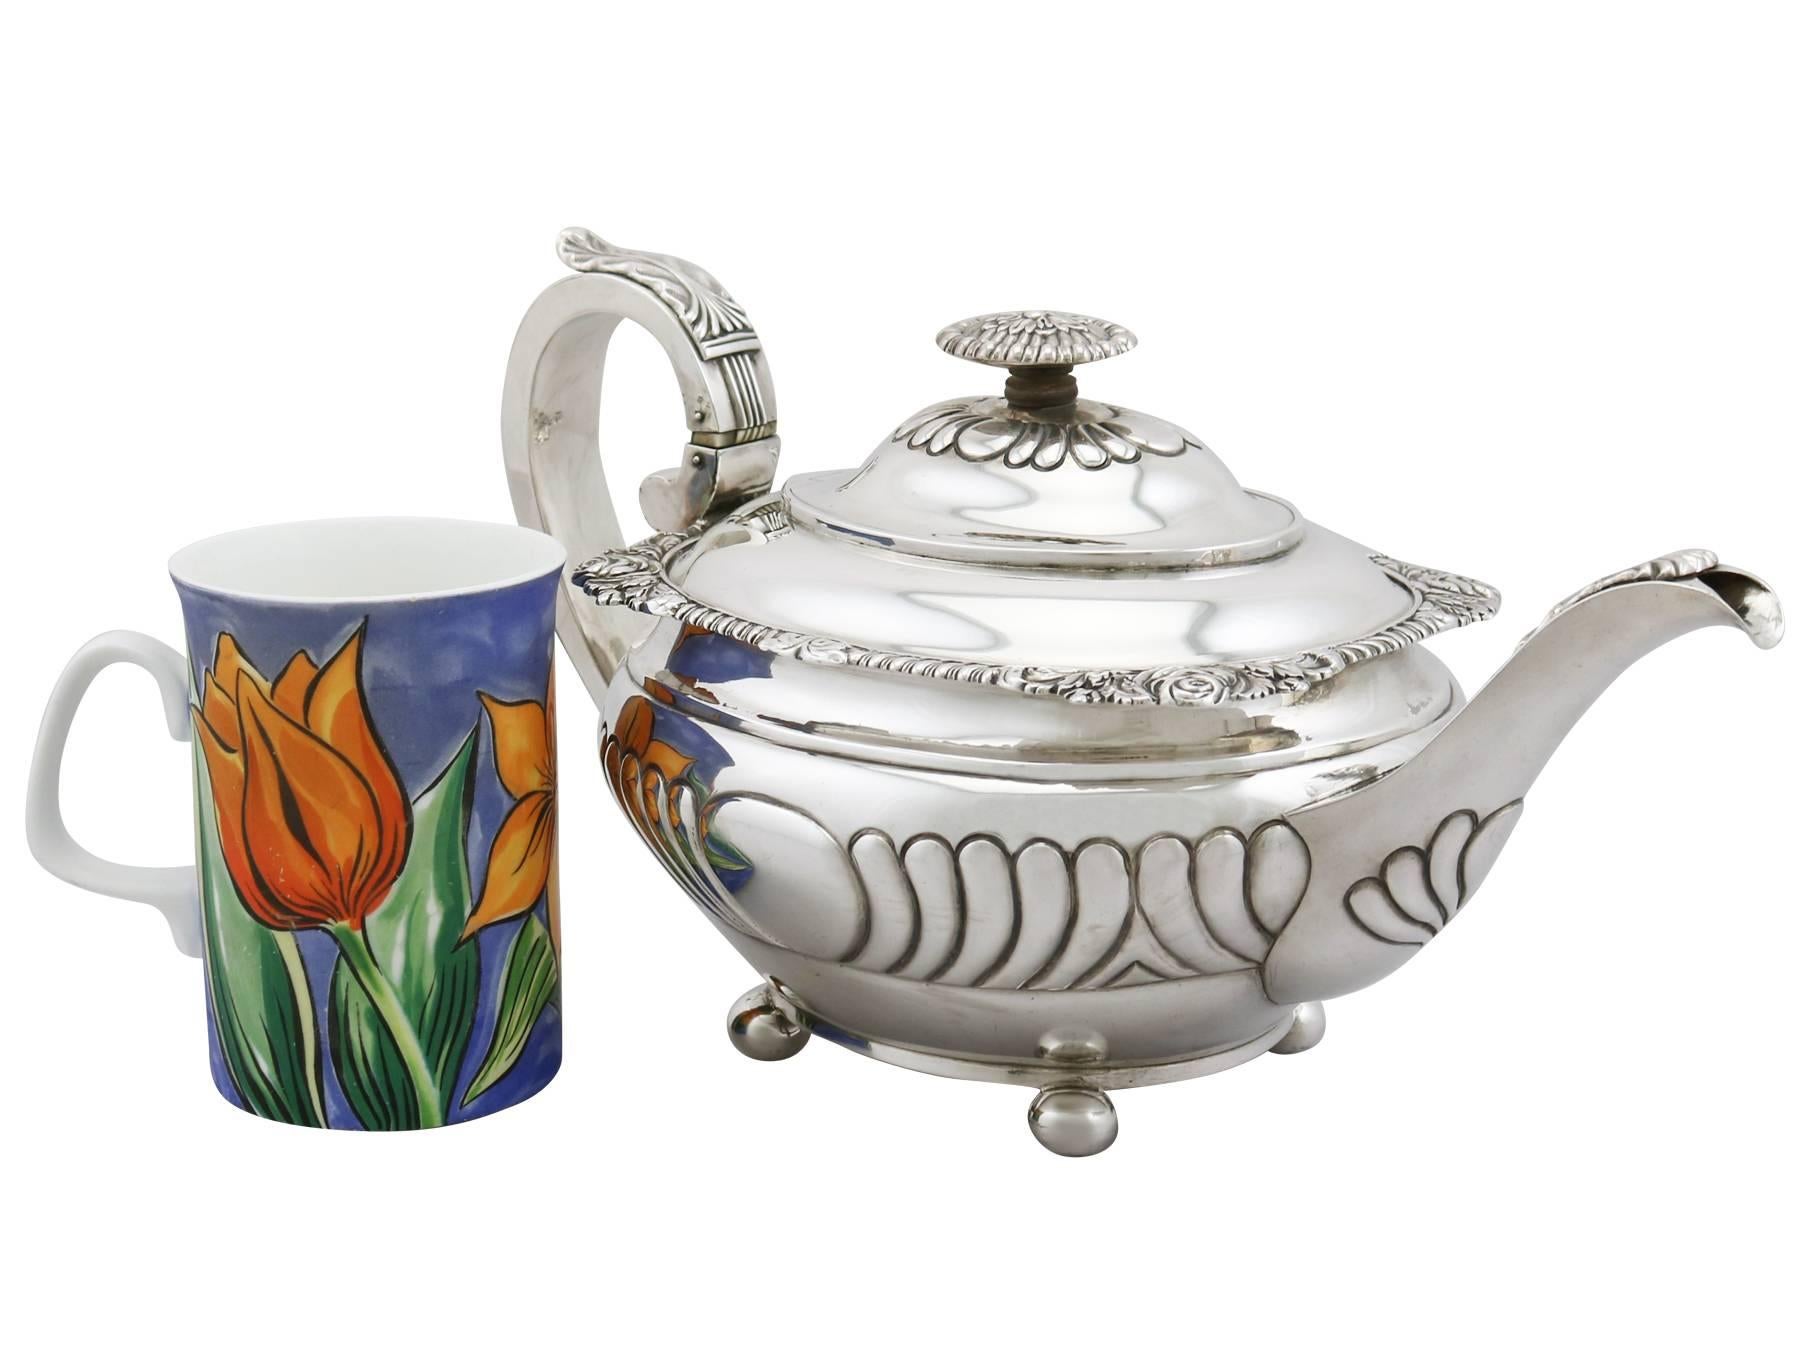 An exceptional, fine and impressive antique Georgian English sterling silver teapot made in York by James Barber & William Whitwell; an addition to our silver teaware collection.

This exceptional antique George III sterling silver teapot has an